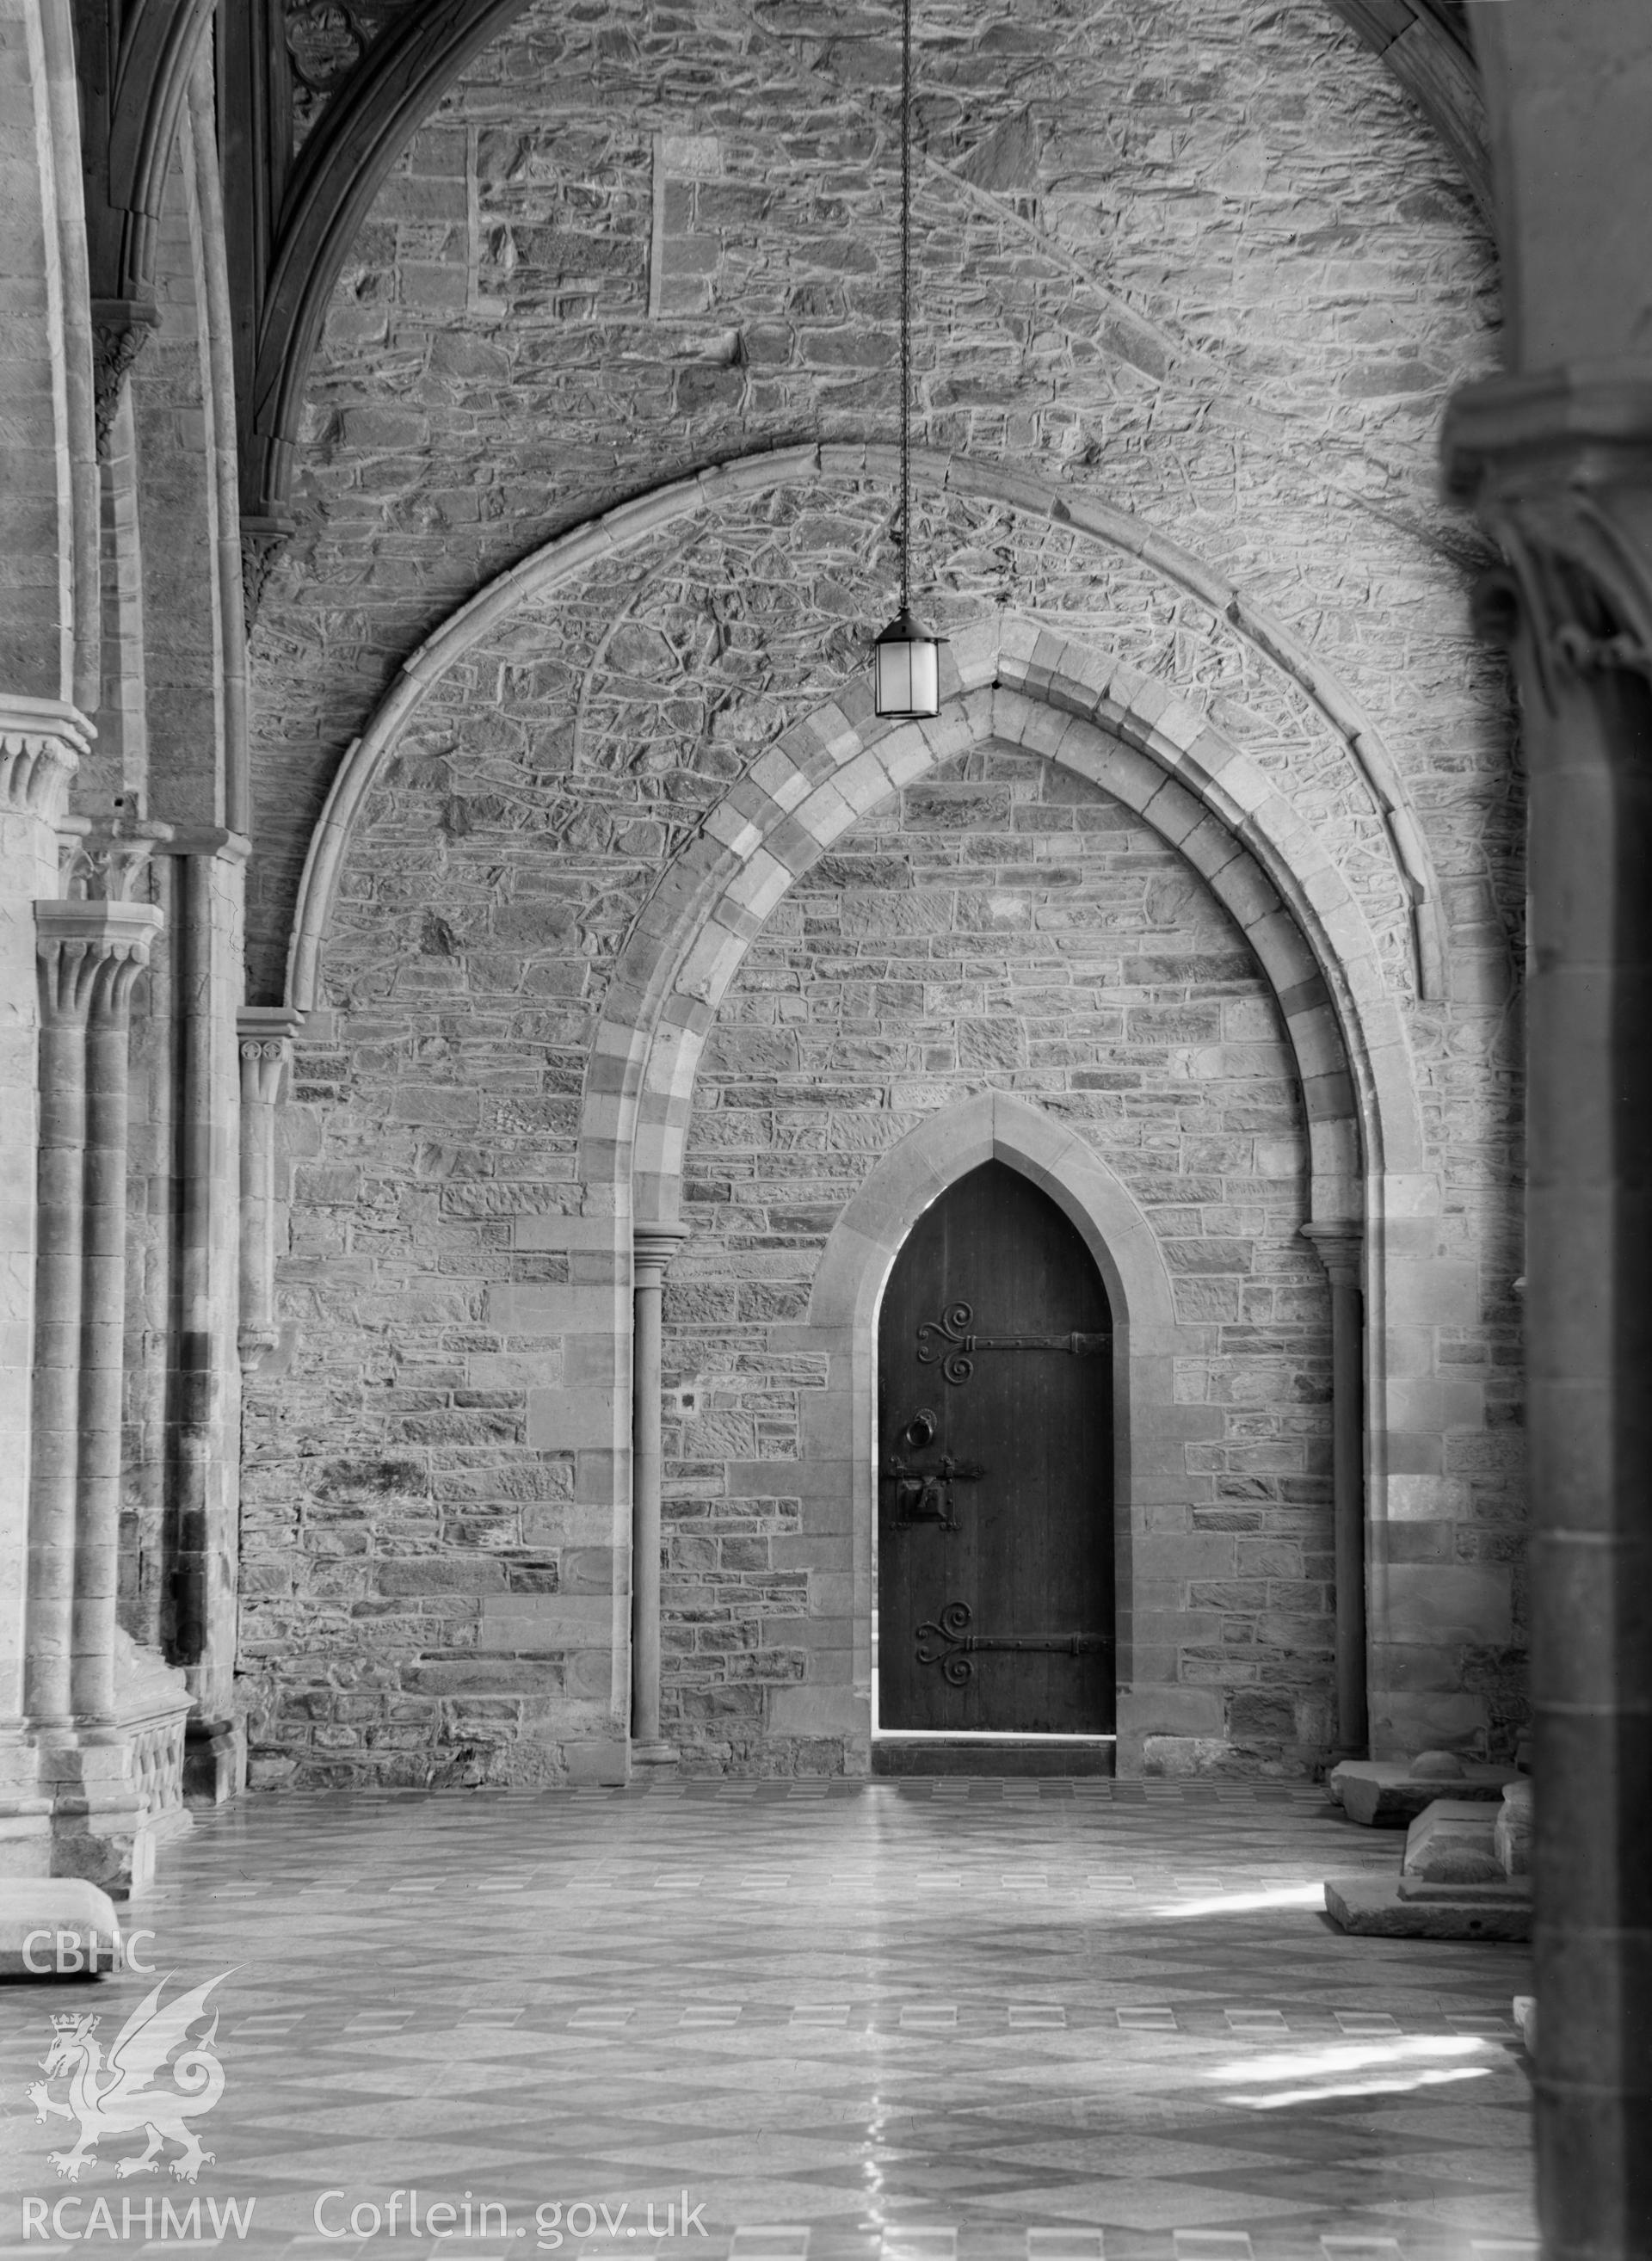 Digital copy of a black and white nitrate negative showing interior view of entrance at St. David's Cathedral, taken by E.W. Lovegrove, July 1936